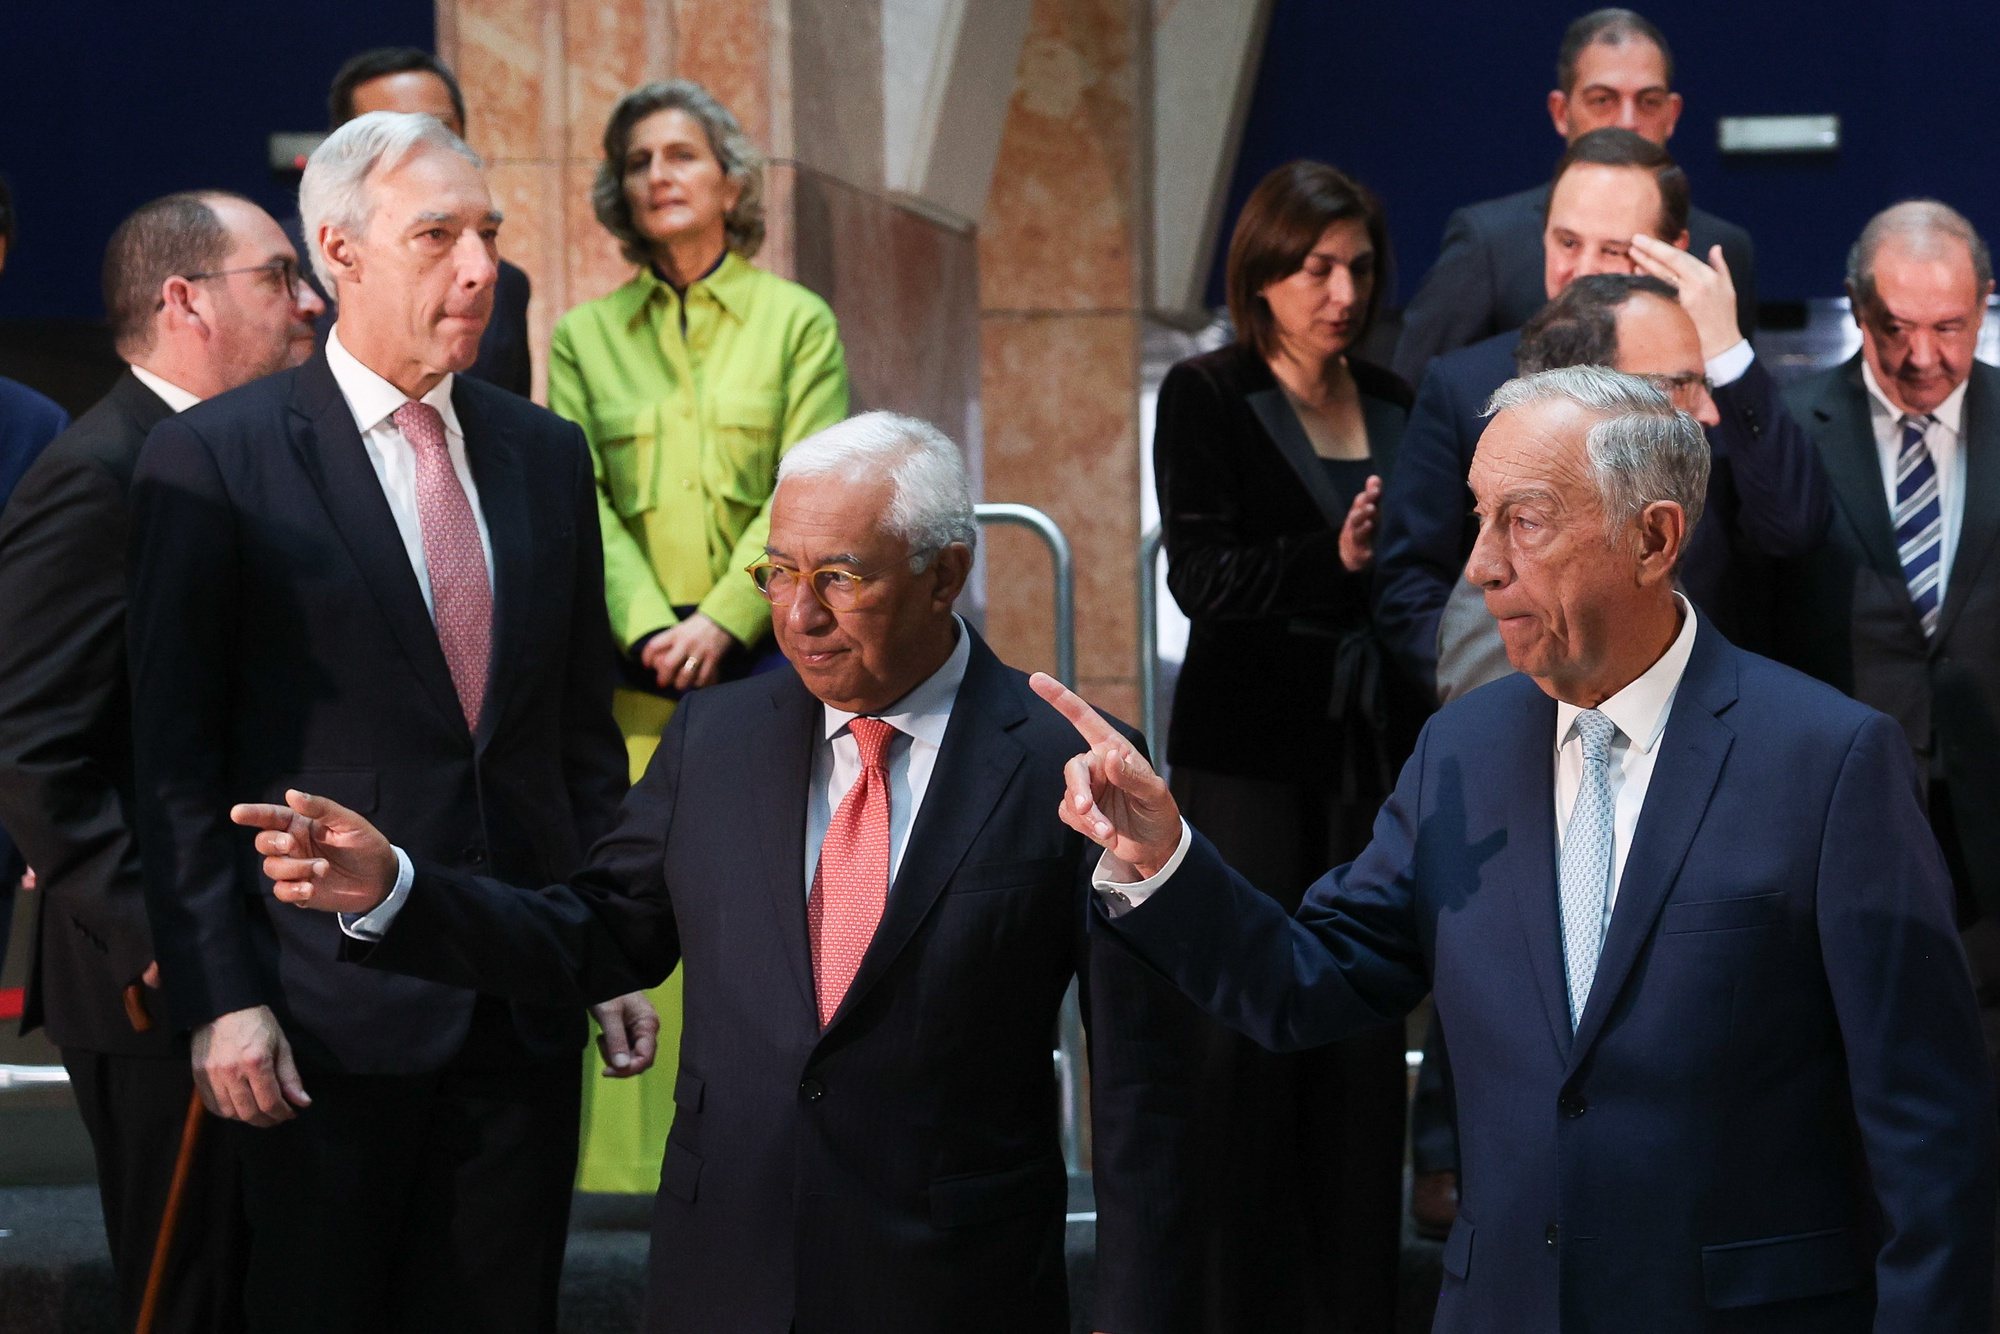 Portugal&#039;s President Marcelo Rebelo de Sousa (R) accompanied by Prime Minister Antonio Costa (C), during a family photo with the other members of the Government, during the last meeting of the Council of Ministers of the XXIII Constitutional Government, which he is chairing and which for the first time is being held in the new Government building, the former headquarters of Caixa Geral de Depósitos (CGD), in Lisbon, Portugal, 25 March 2024. The Council of Ministers of the government led by Antonio Costa is meeting for the last time today and will be chaired by the head of state, with the PRR&#039;s state of play being one of the topics on the agenda. TIAGO PETINGA/LUSA